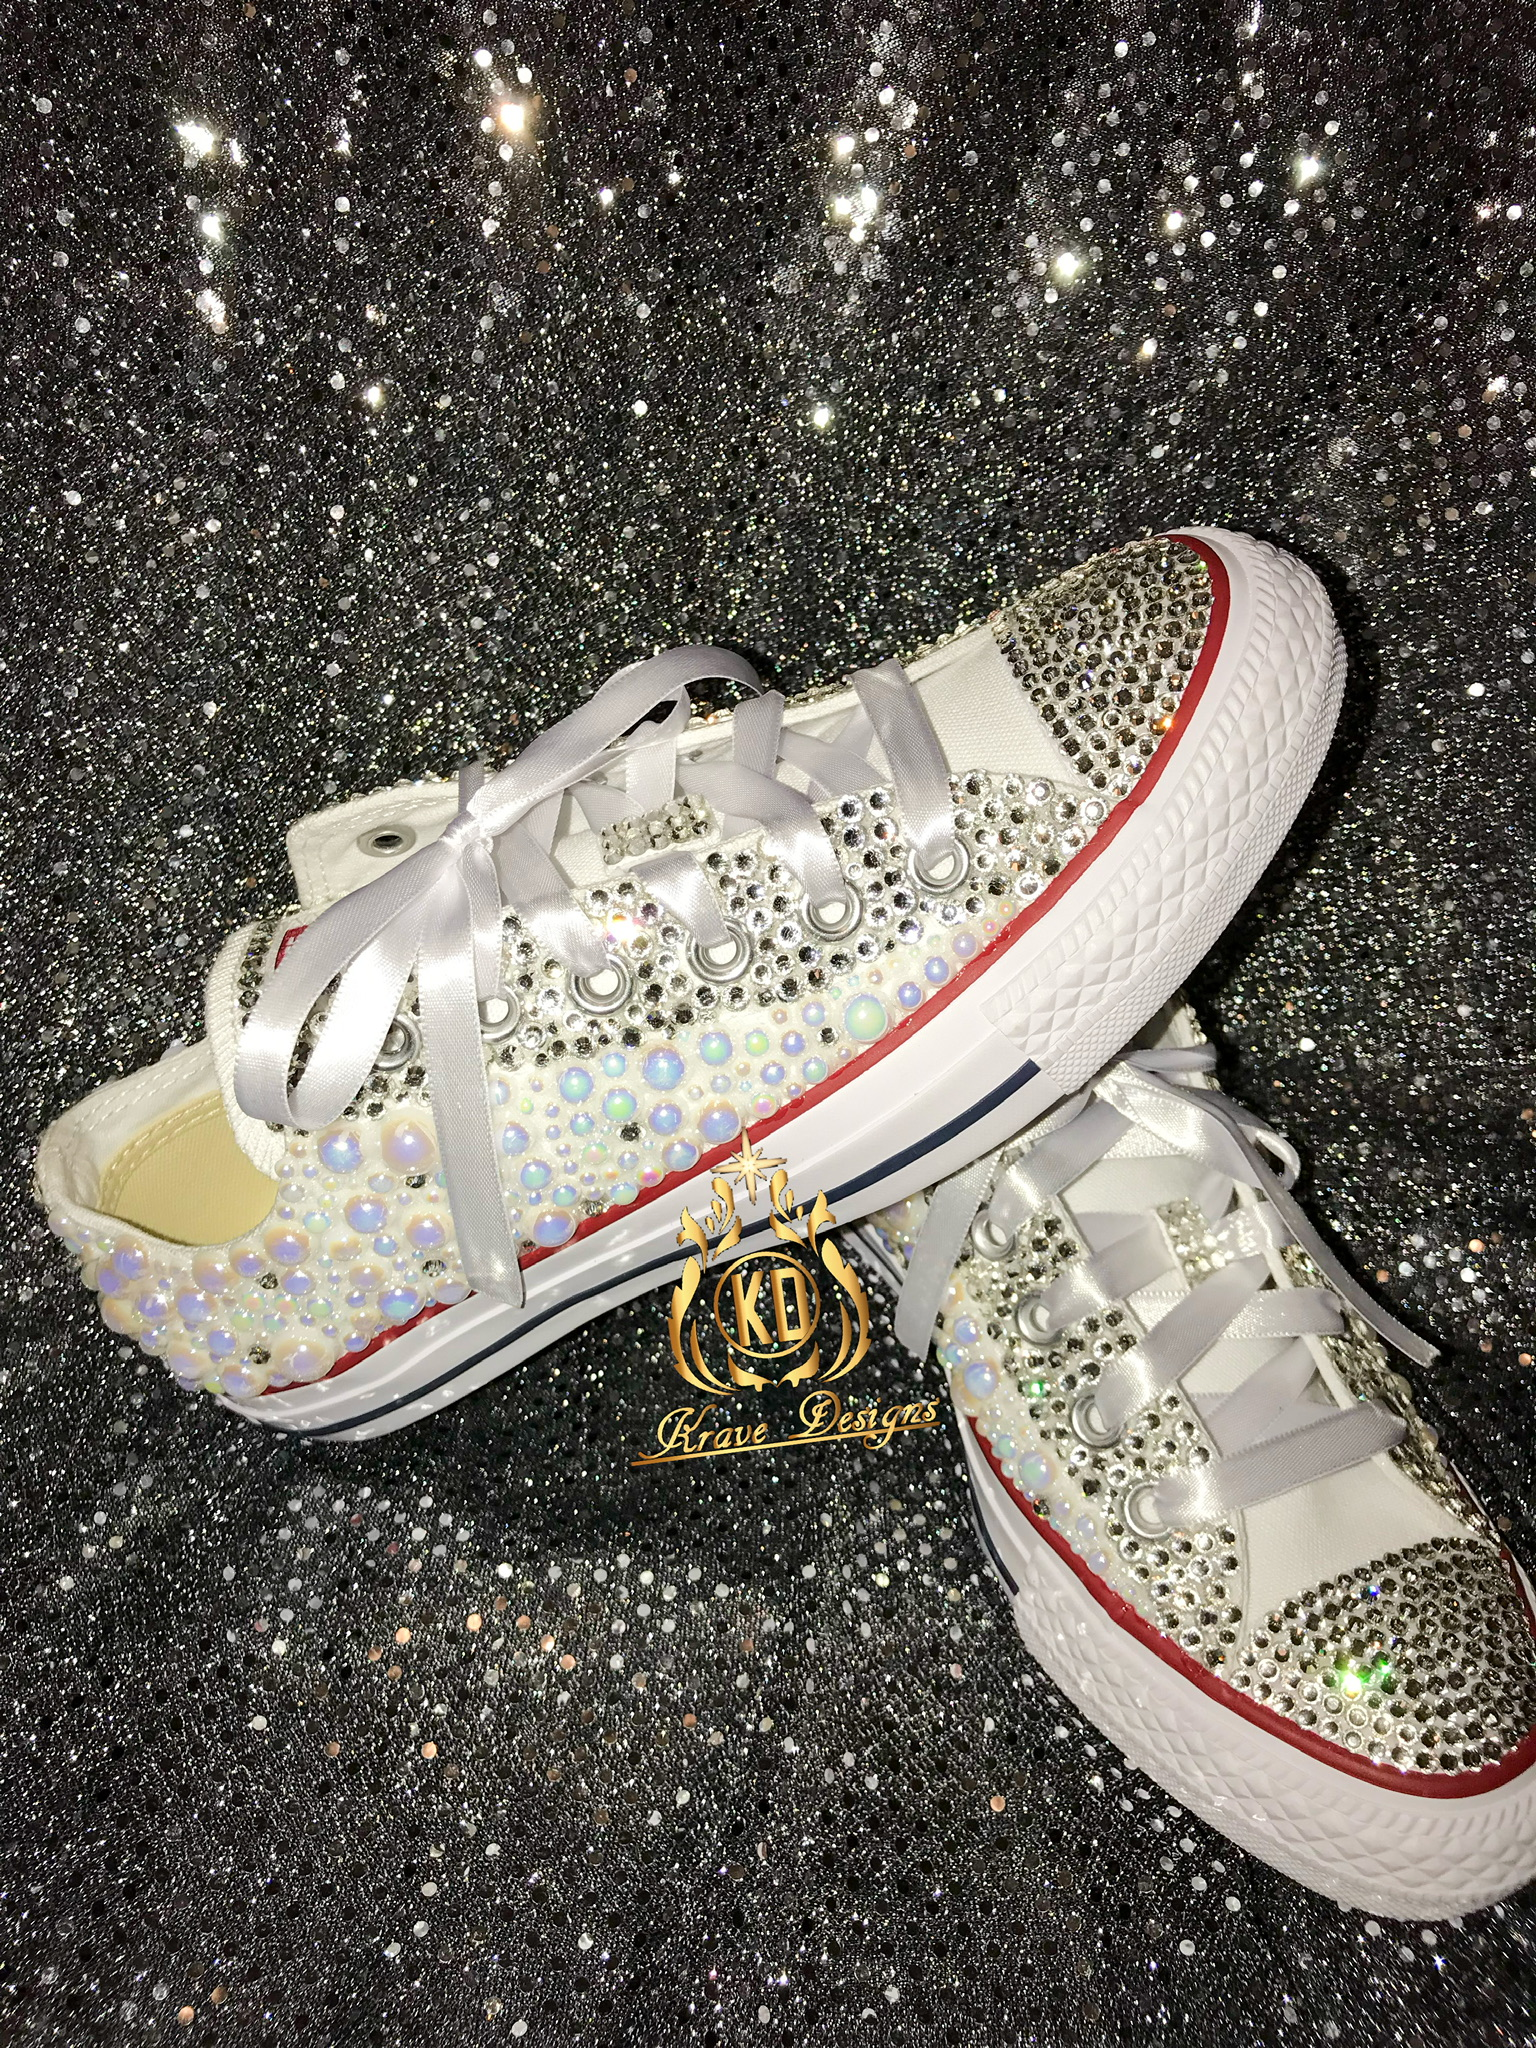 Wedding Converse. Bling and Pearl. Wedding Custom Converse. Bride Converse. Wedding Chucks. Personalized Bride Shoe Women Size 10